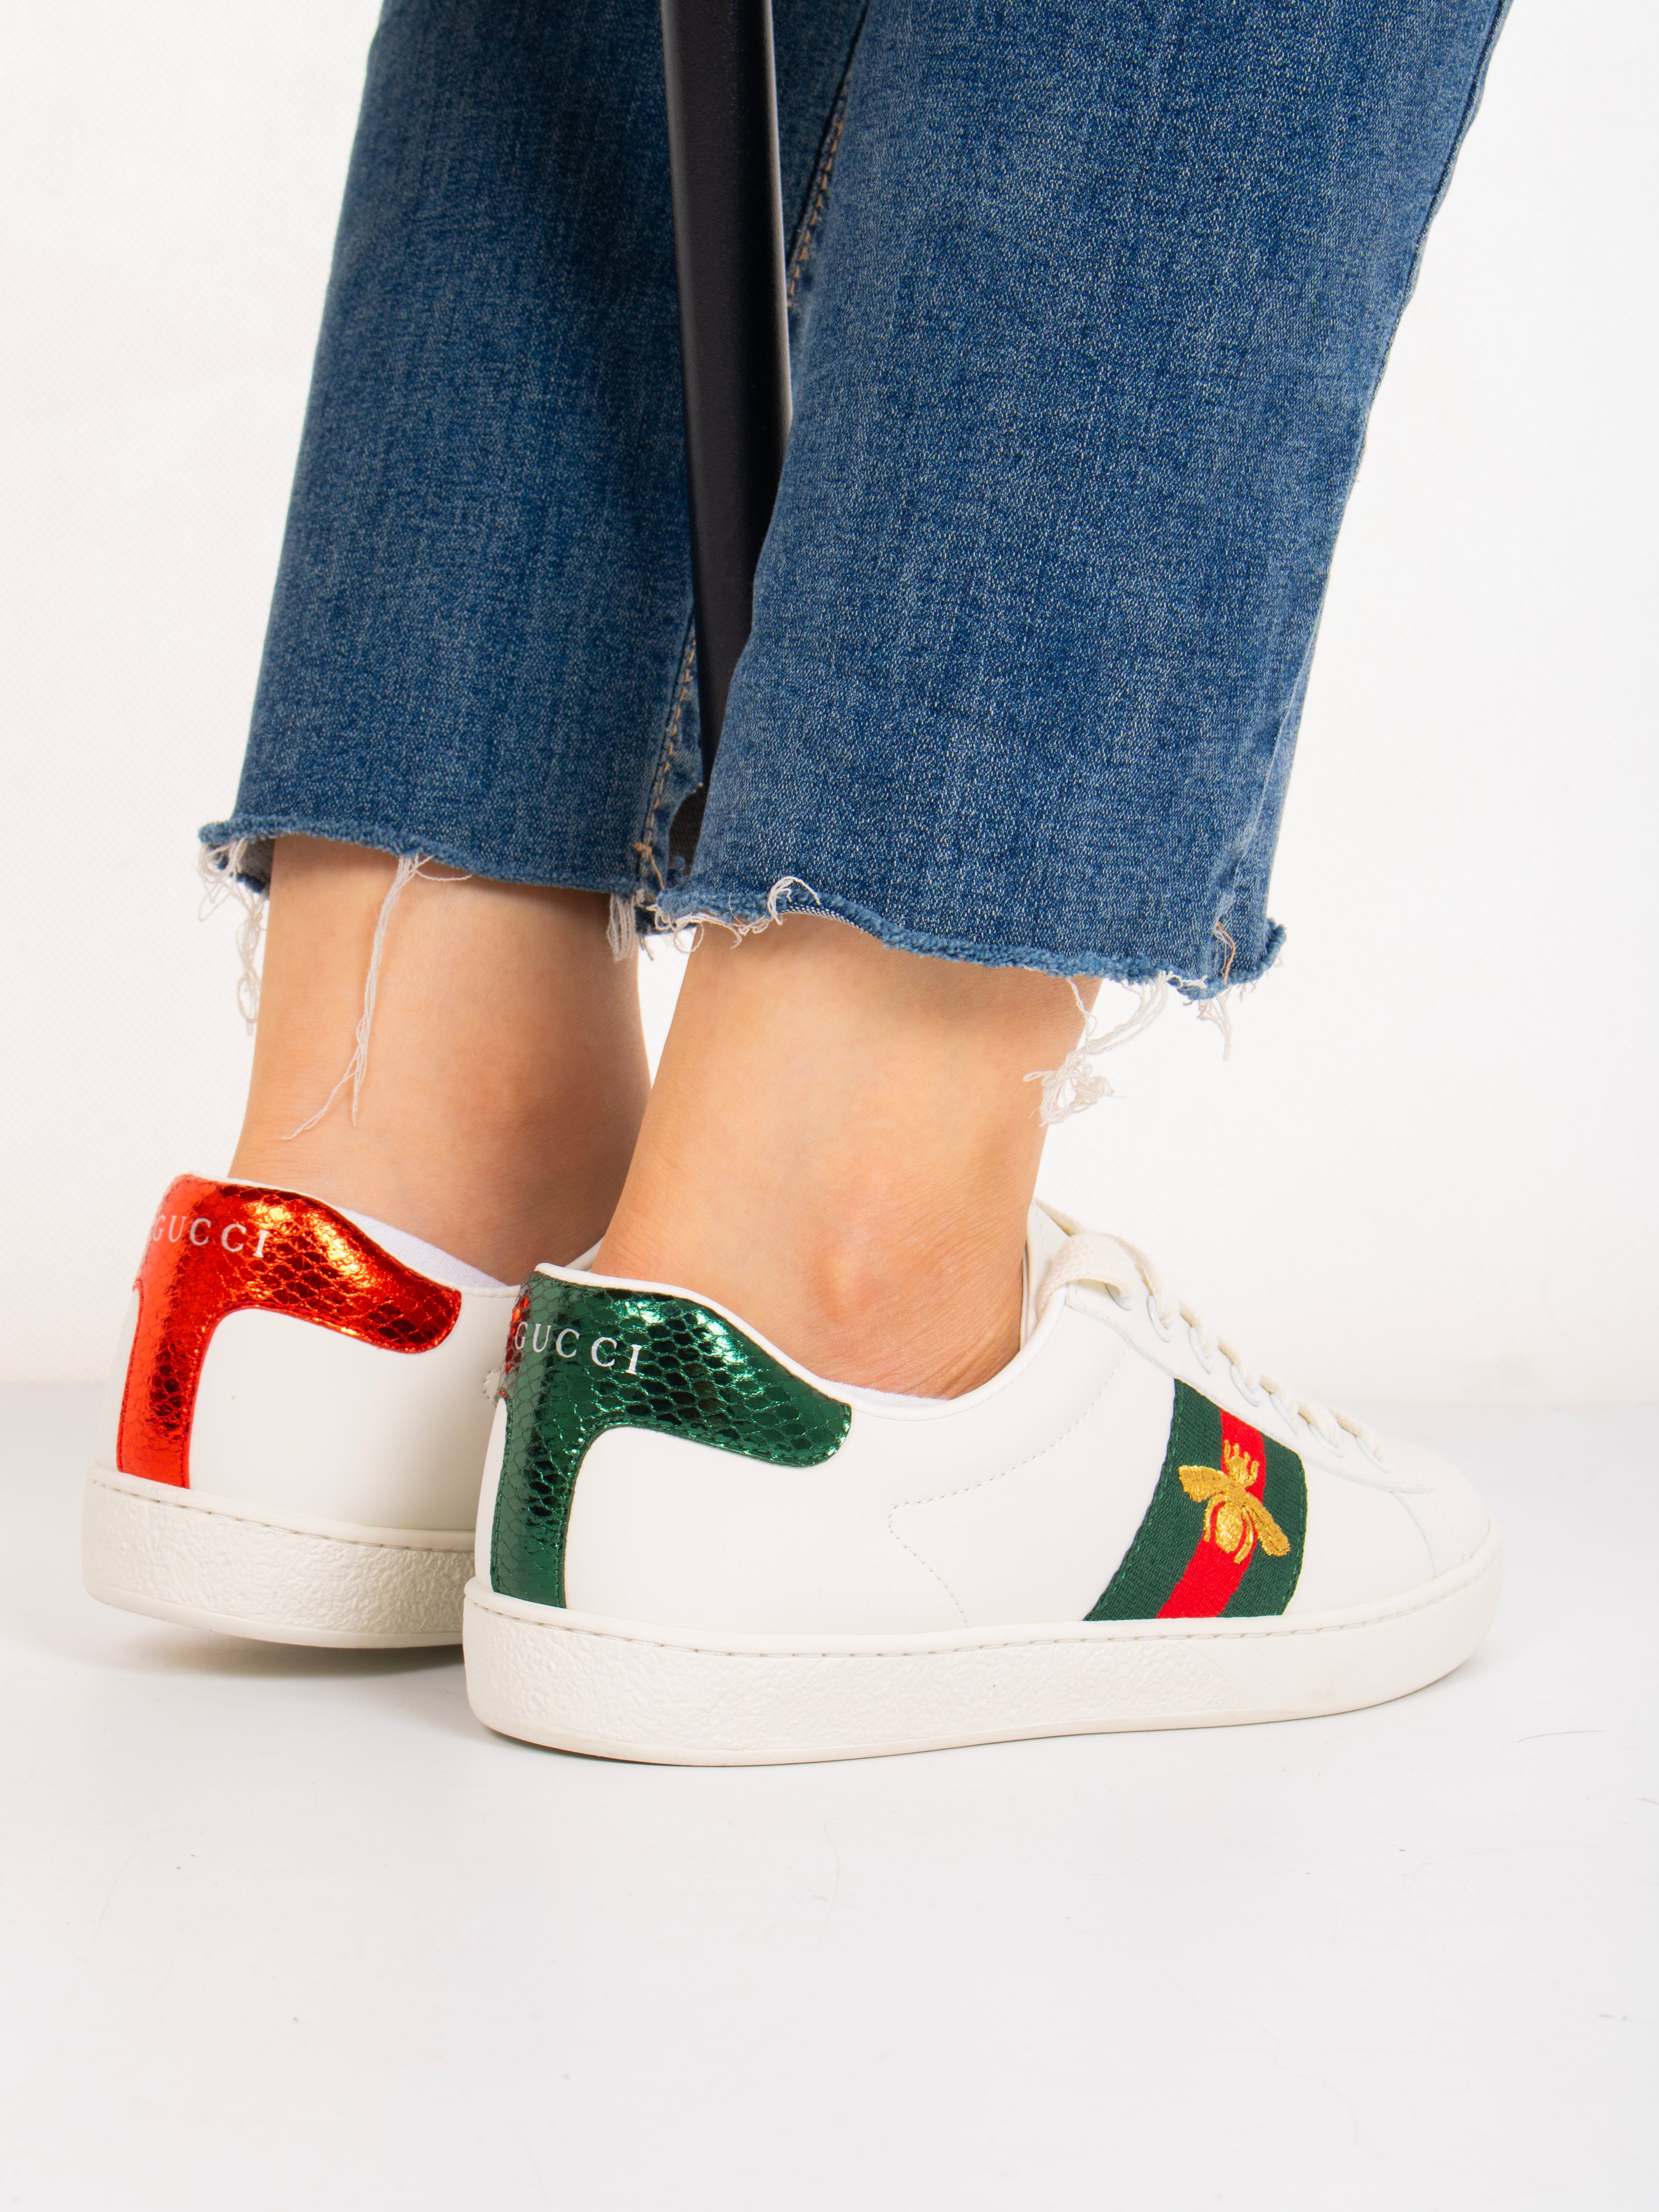 Gucci Ace Leather Sneakers in white